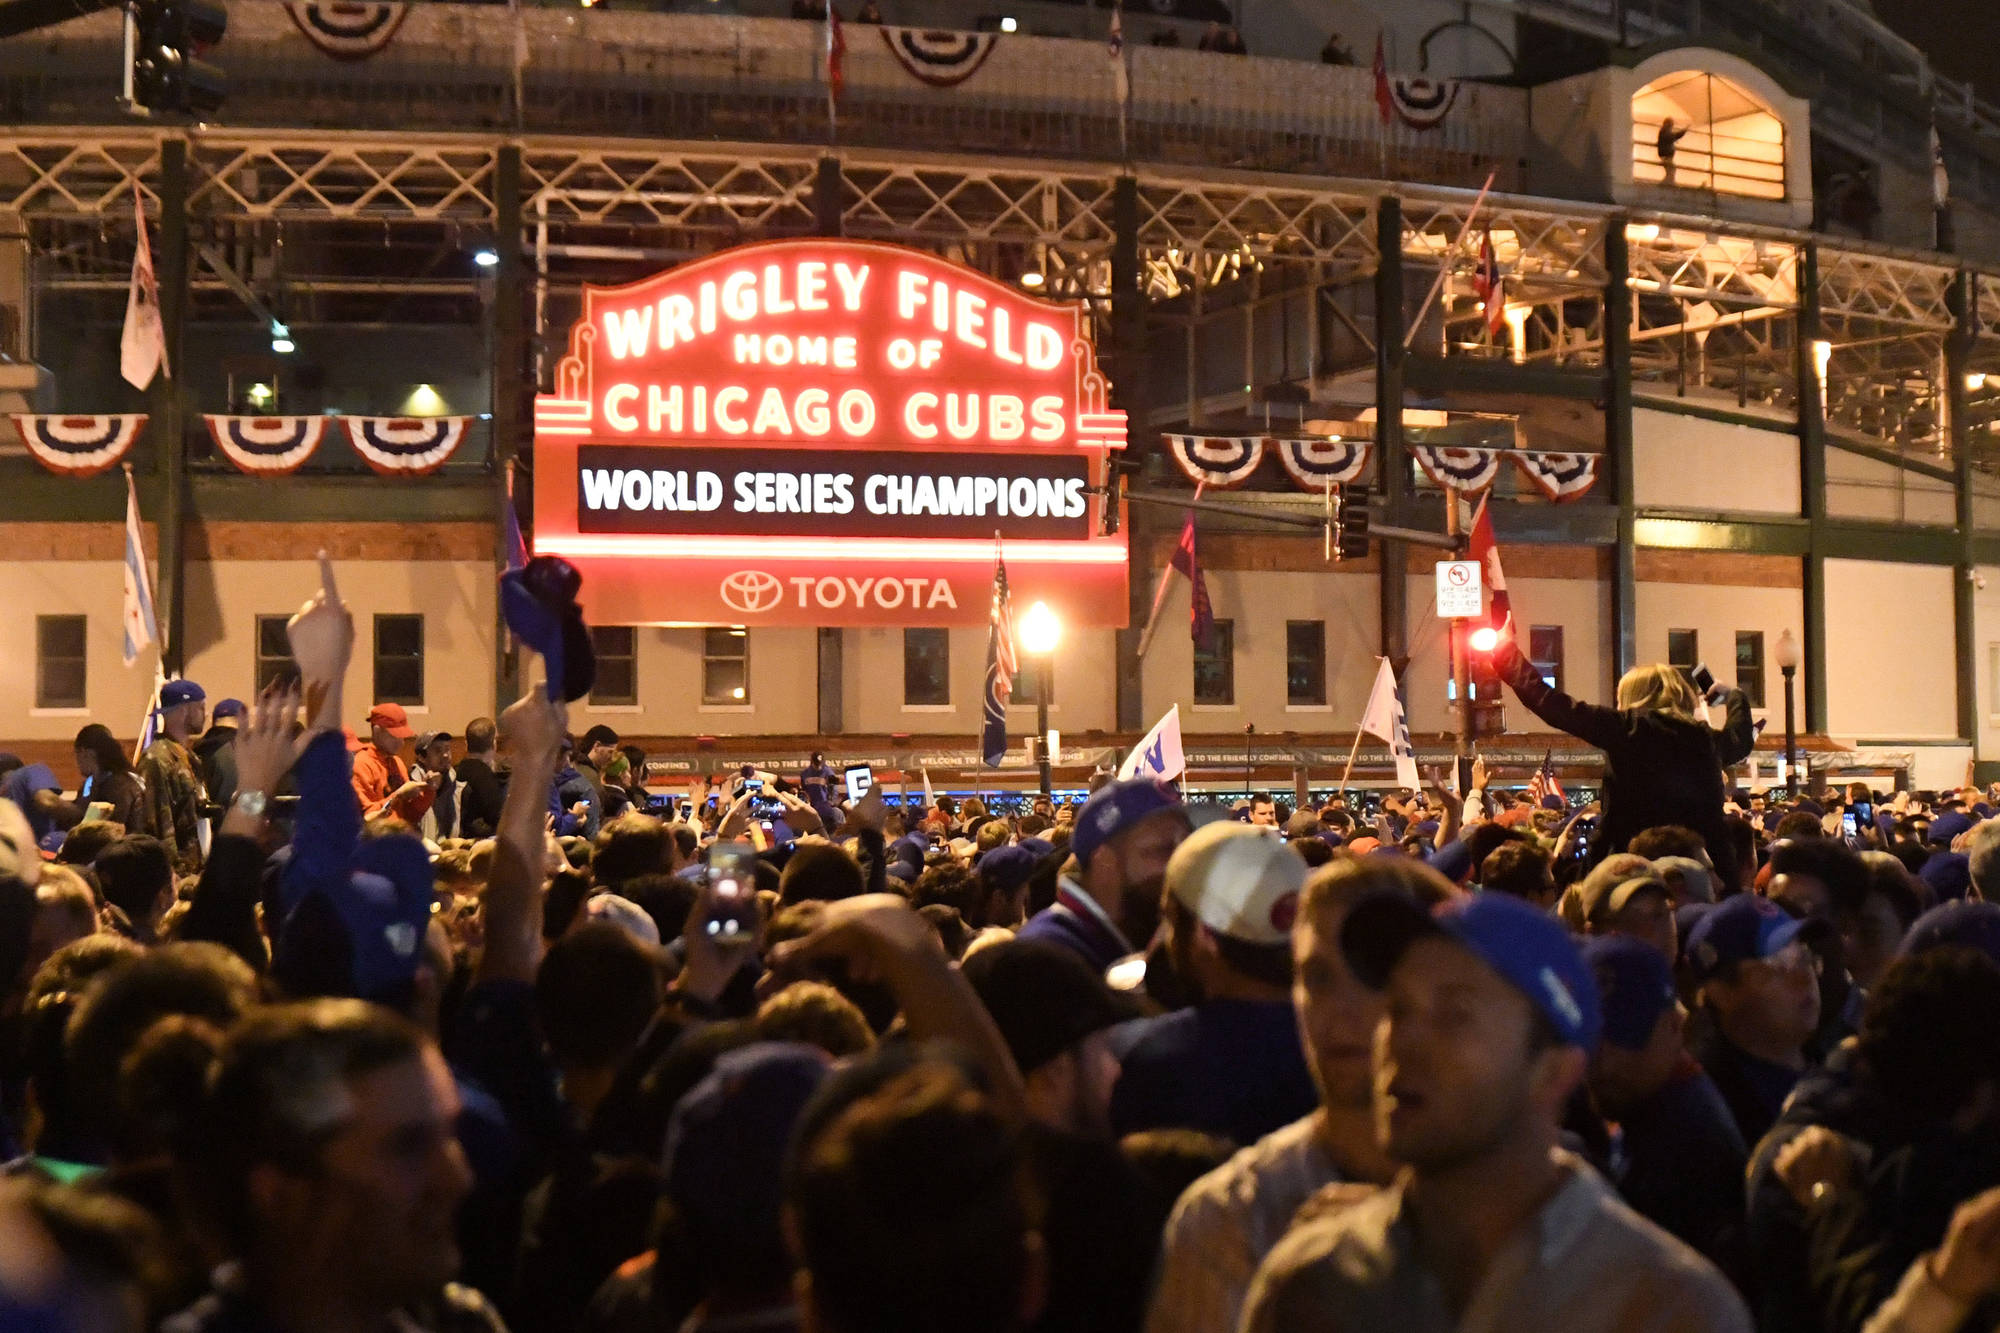 The Chicago Cubs have finally won the World Series...and so did Budweiser